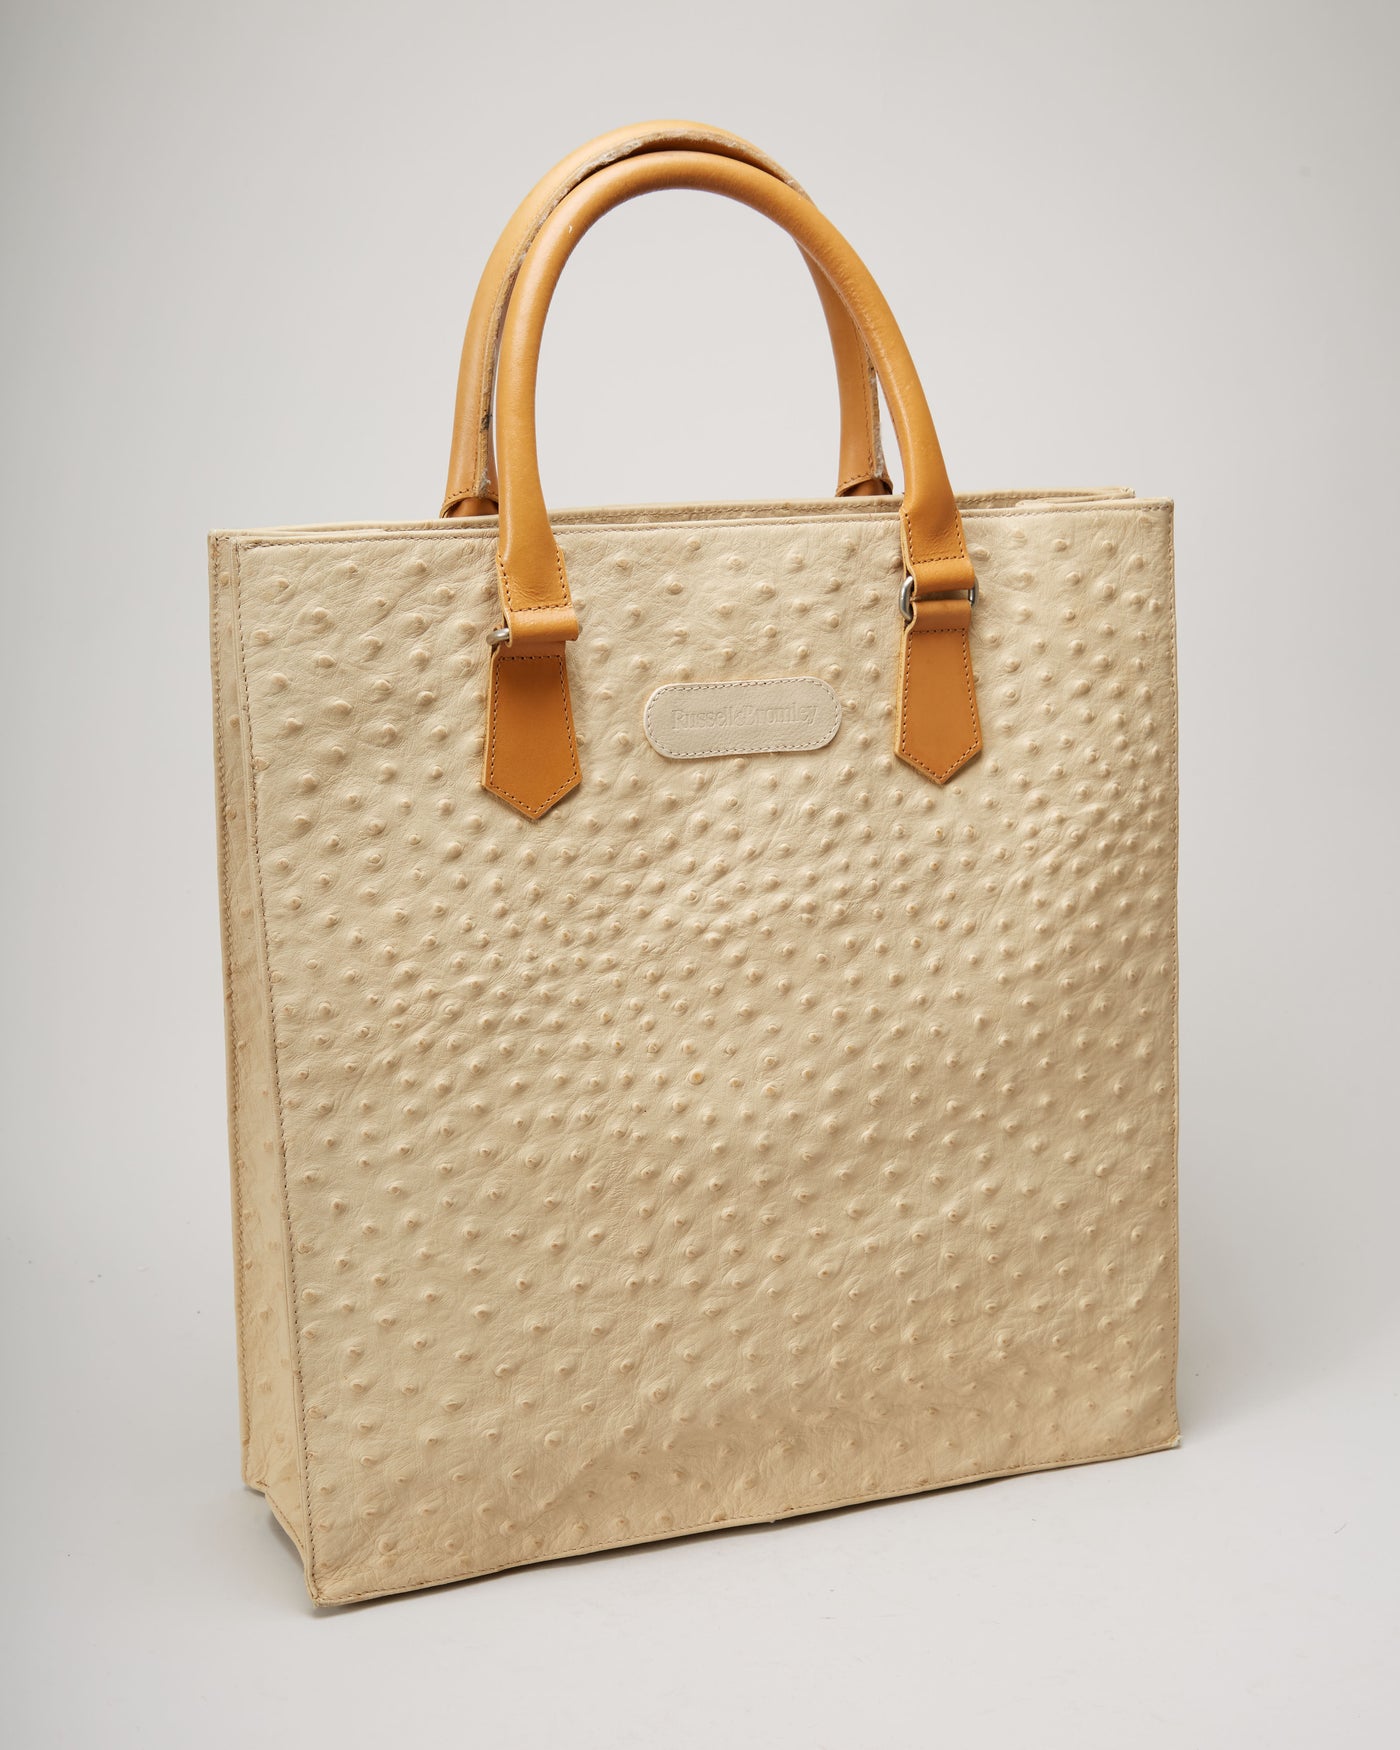 Russell & Bromley Cream Ostrich Leather Bag - One Size